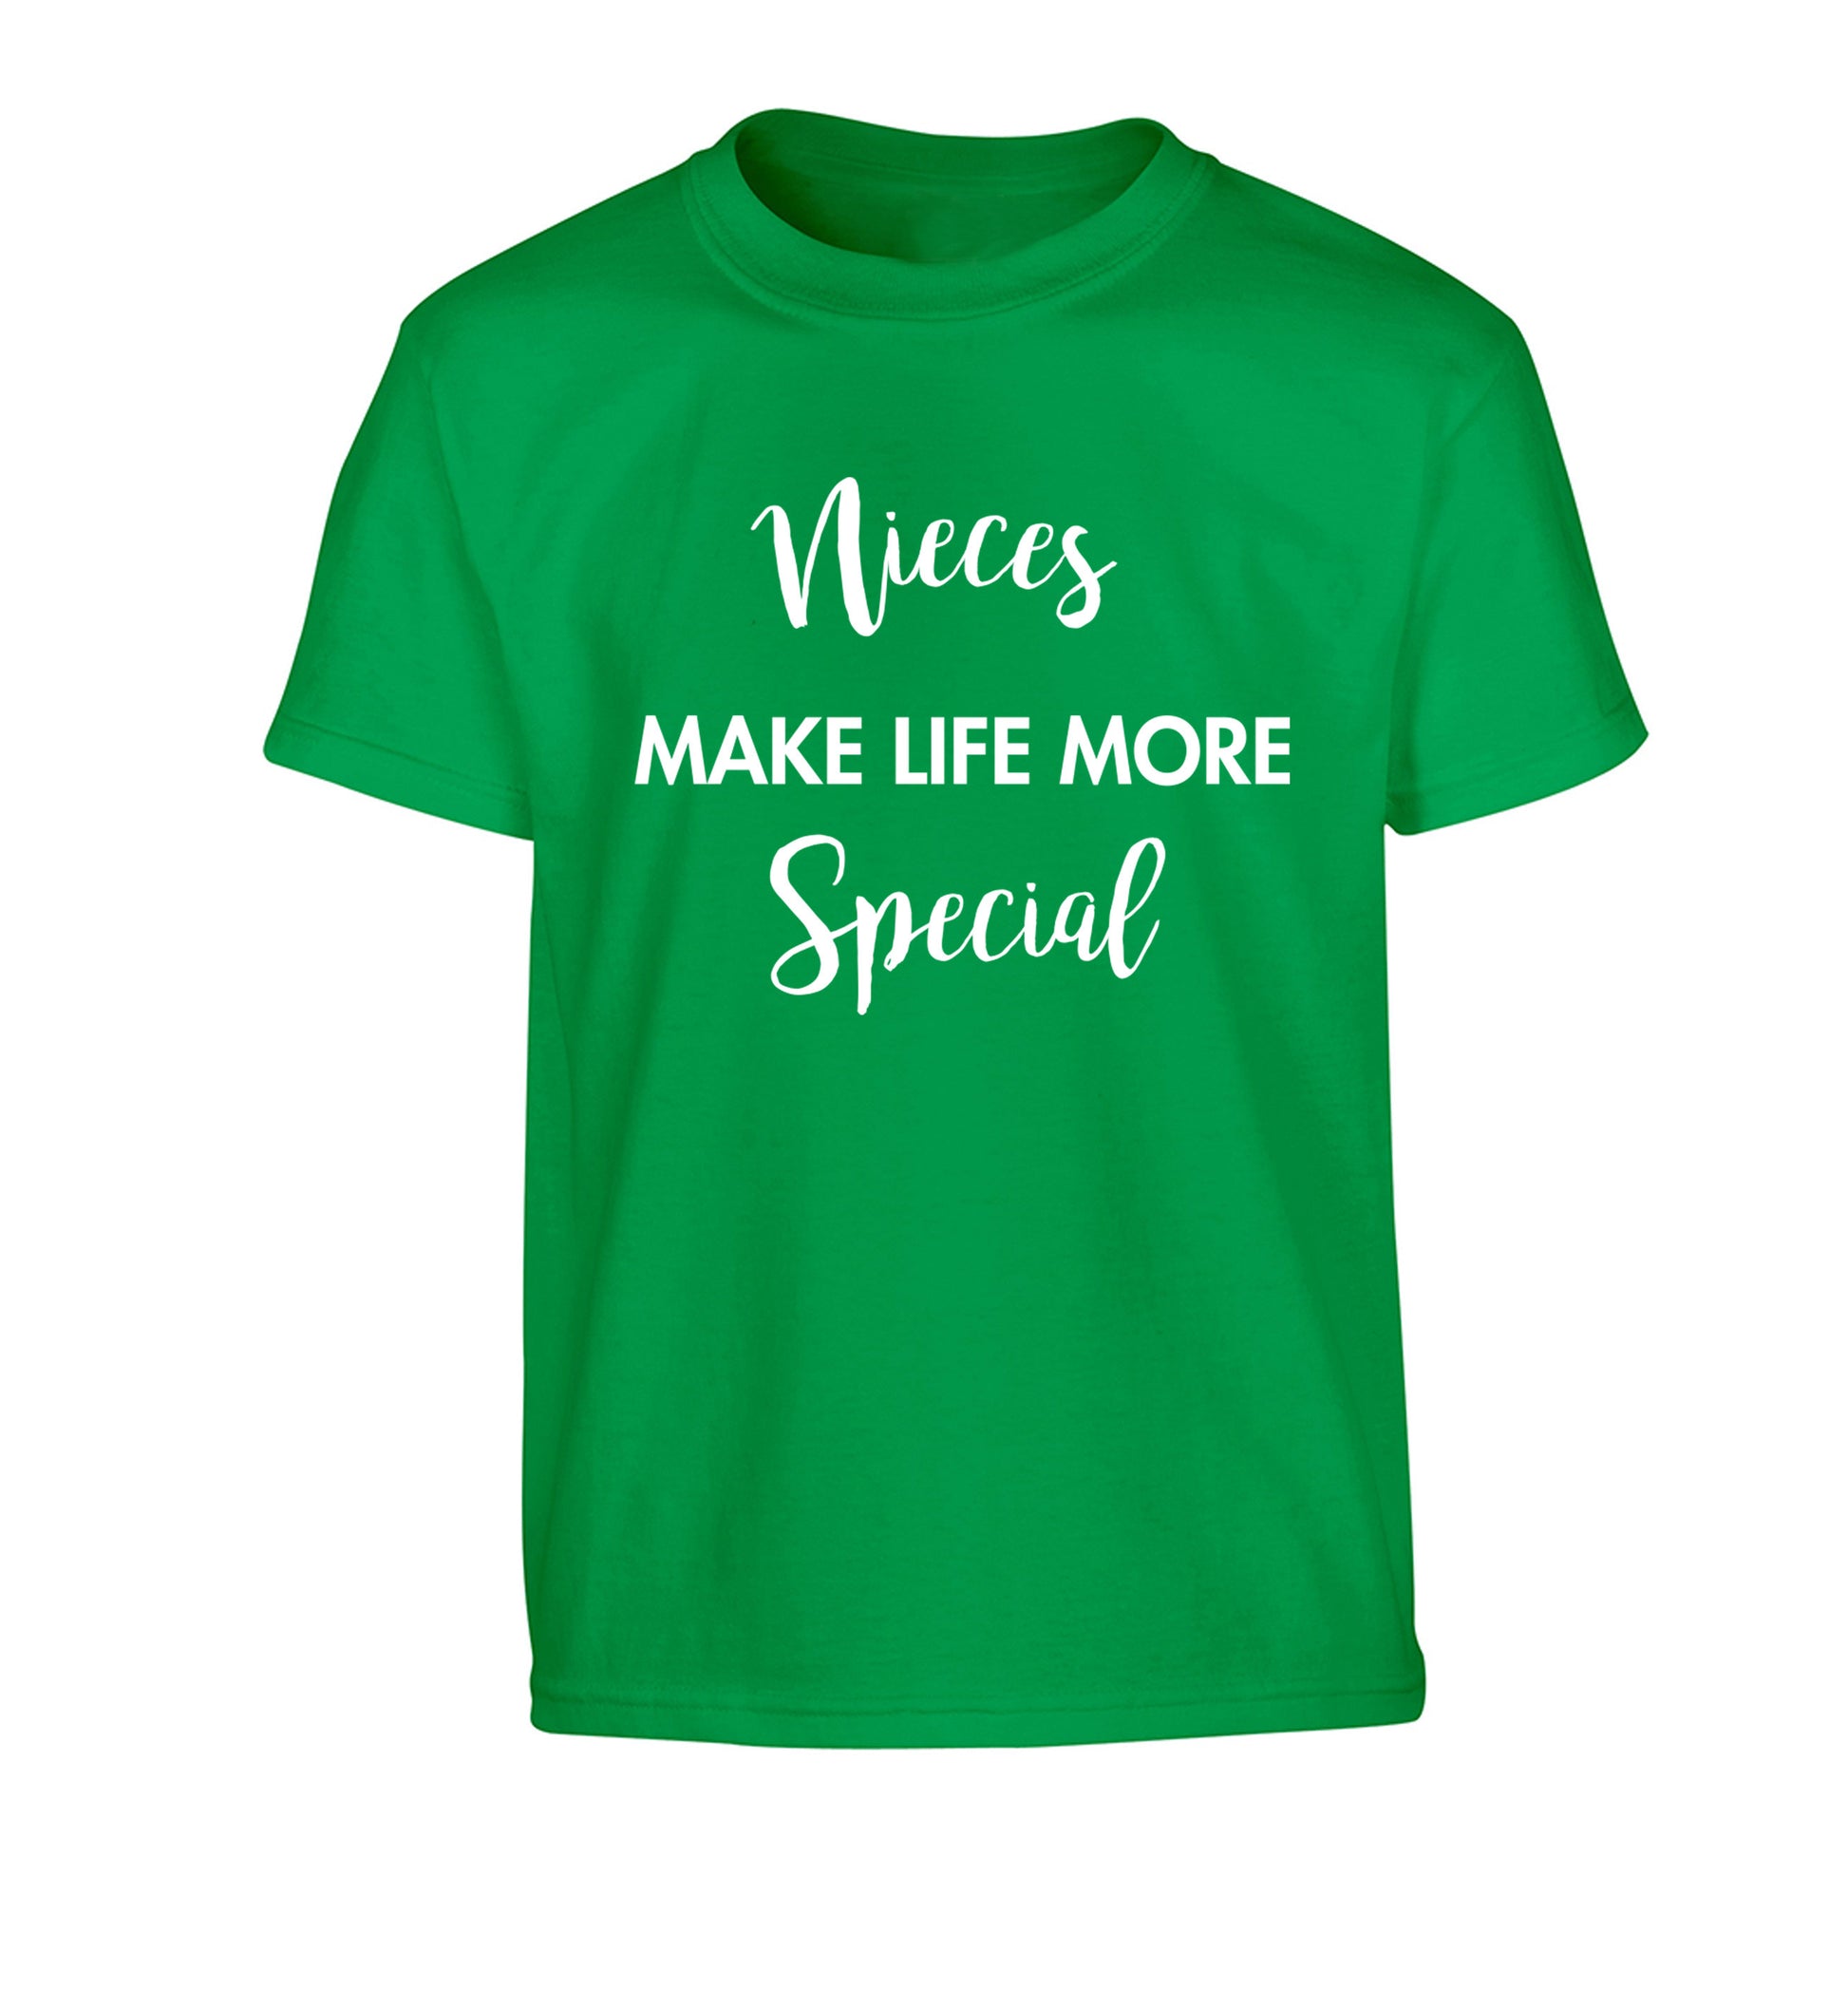 Nieces make life more special Children's green Tshirt 12-14 Years